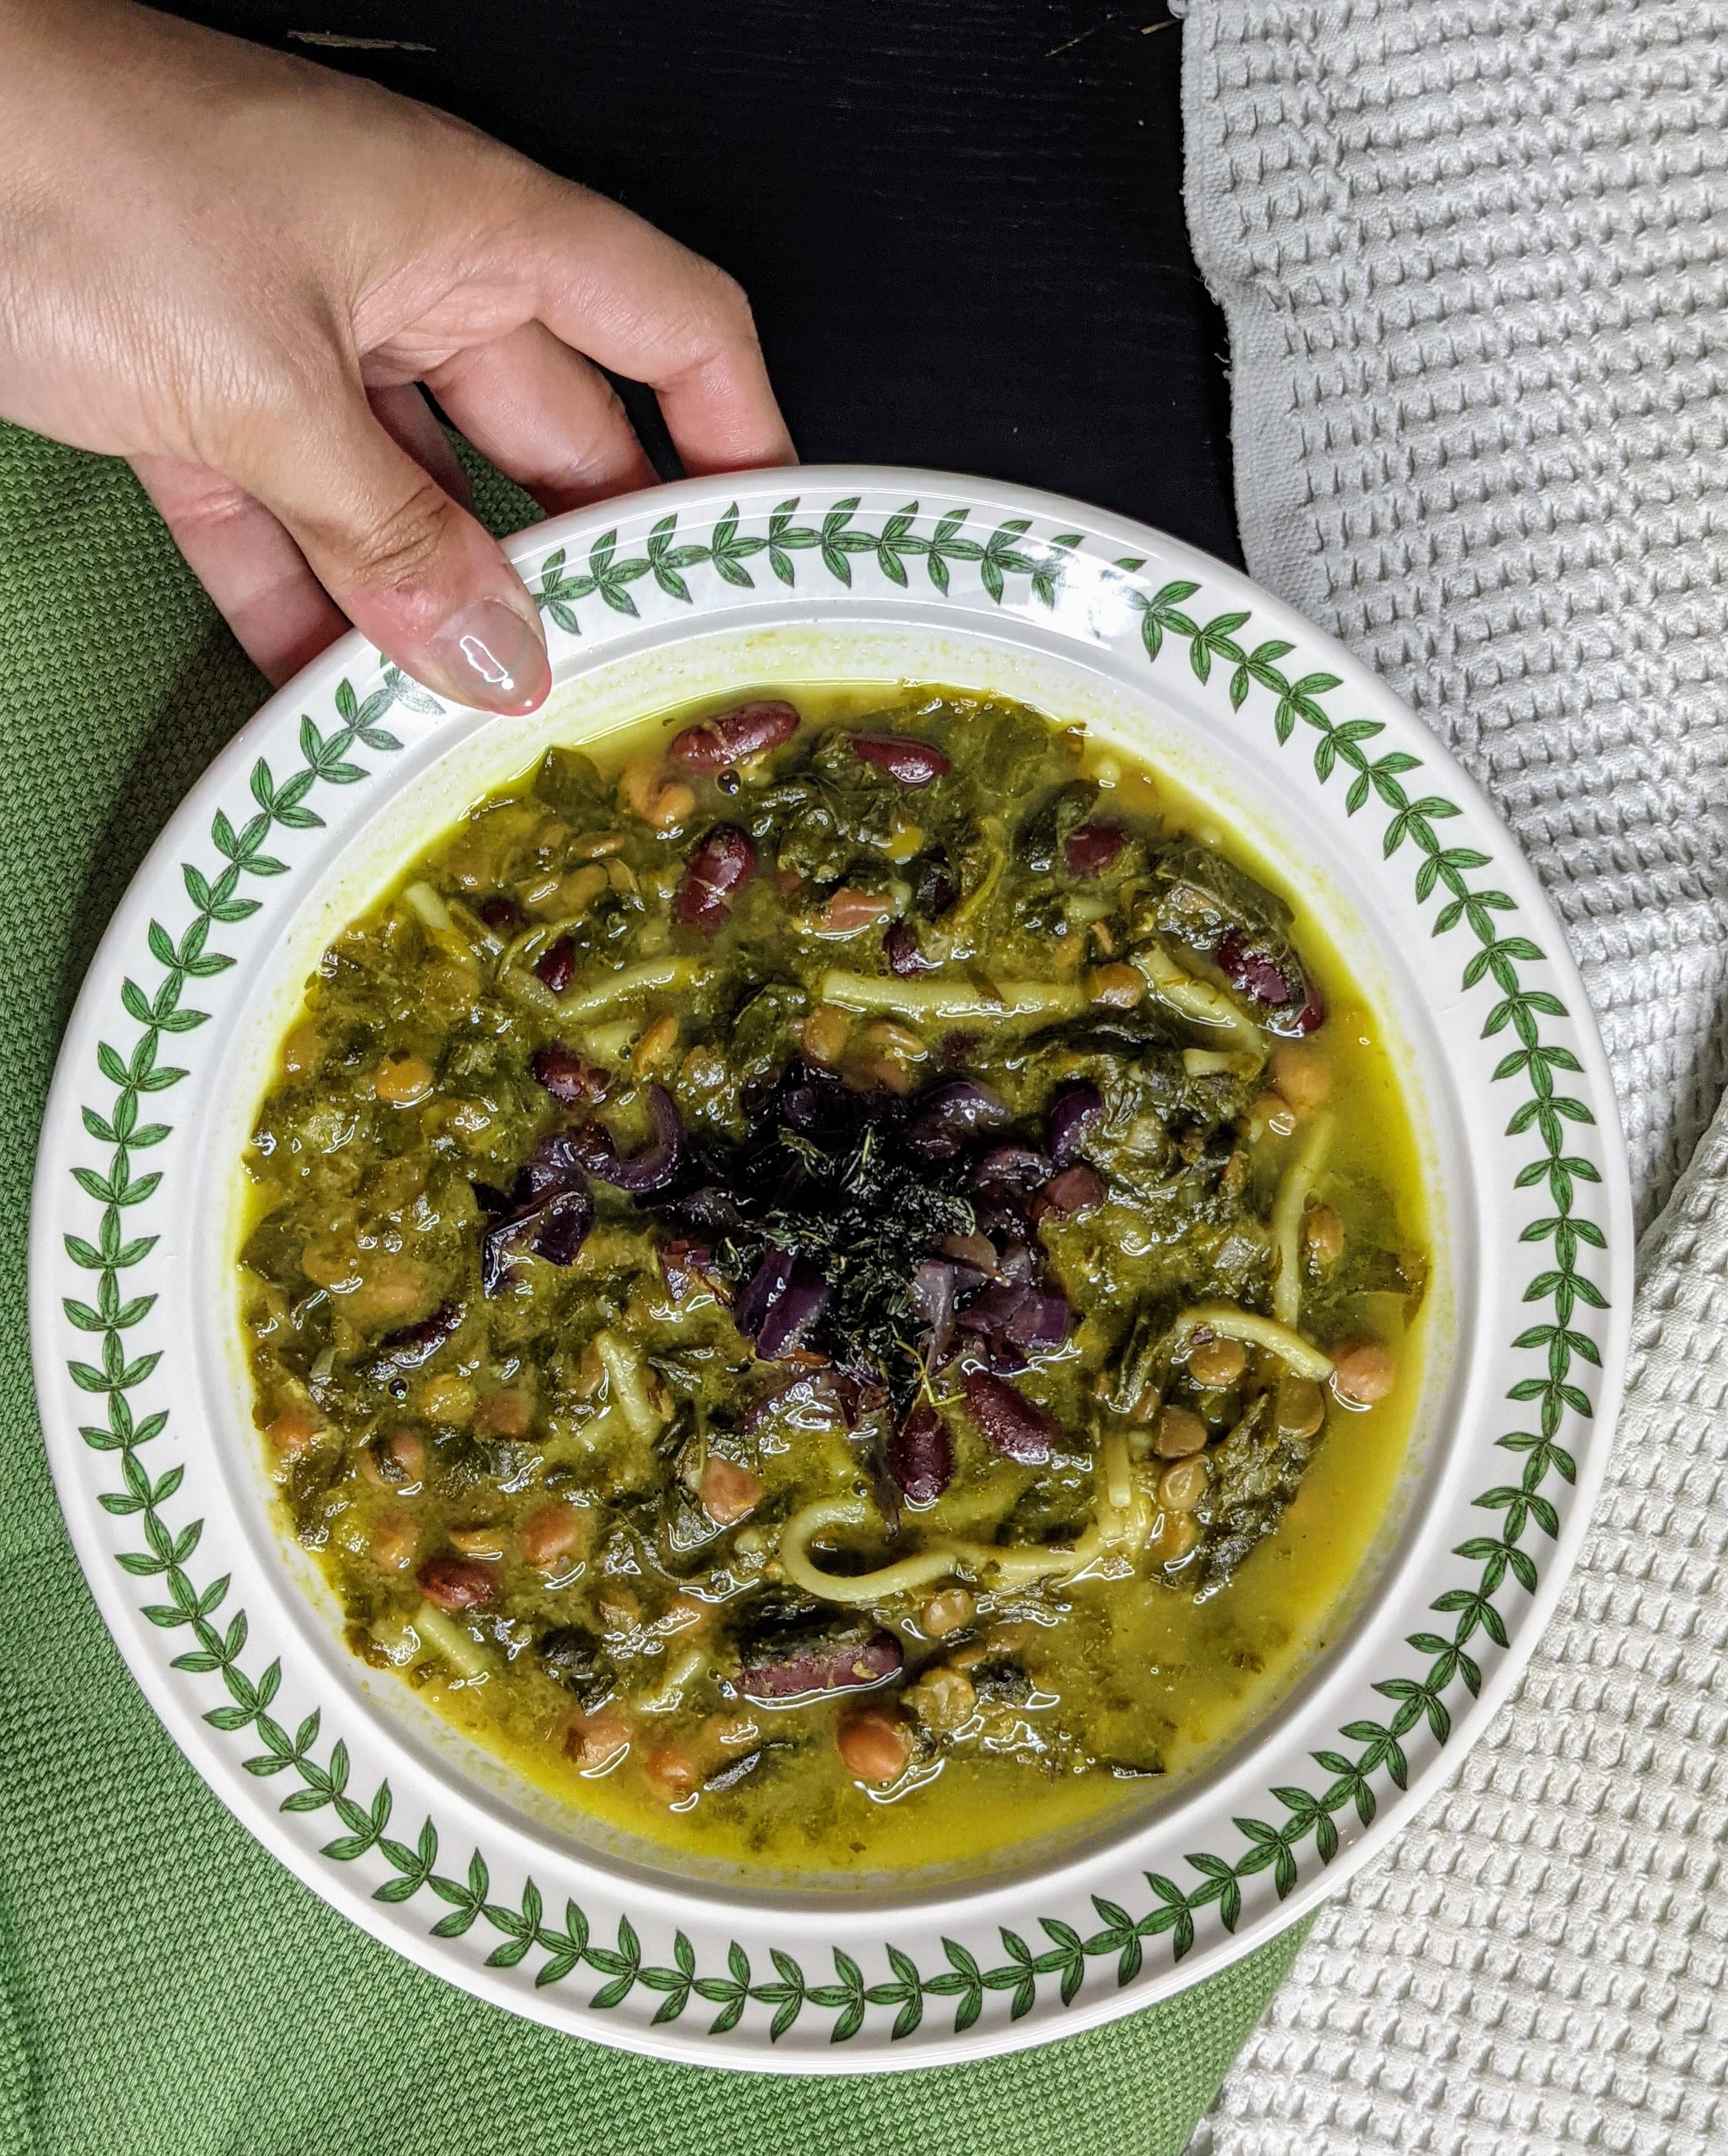 This soup is naturally vegetarian, but can also easily be made vegan